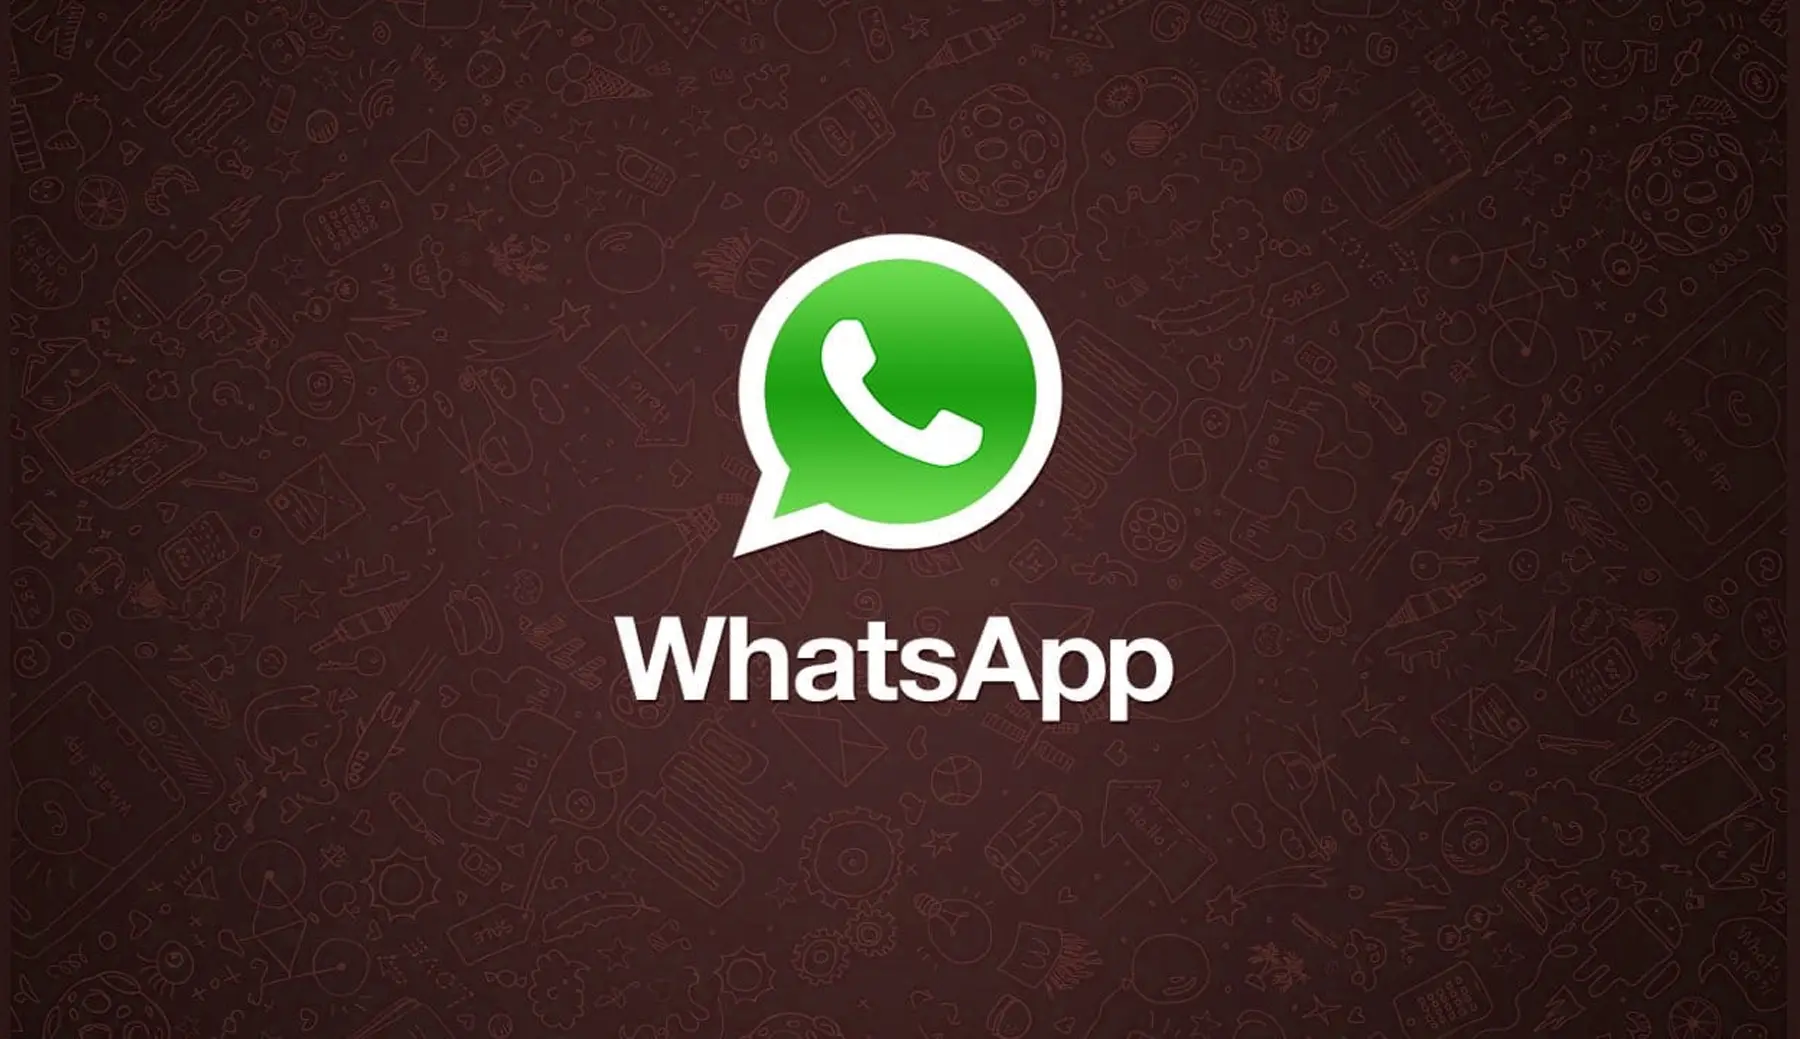 WhatsApp is gearing up to launch a file sharing feature that works even without an internet connection.